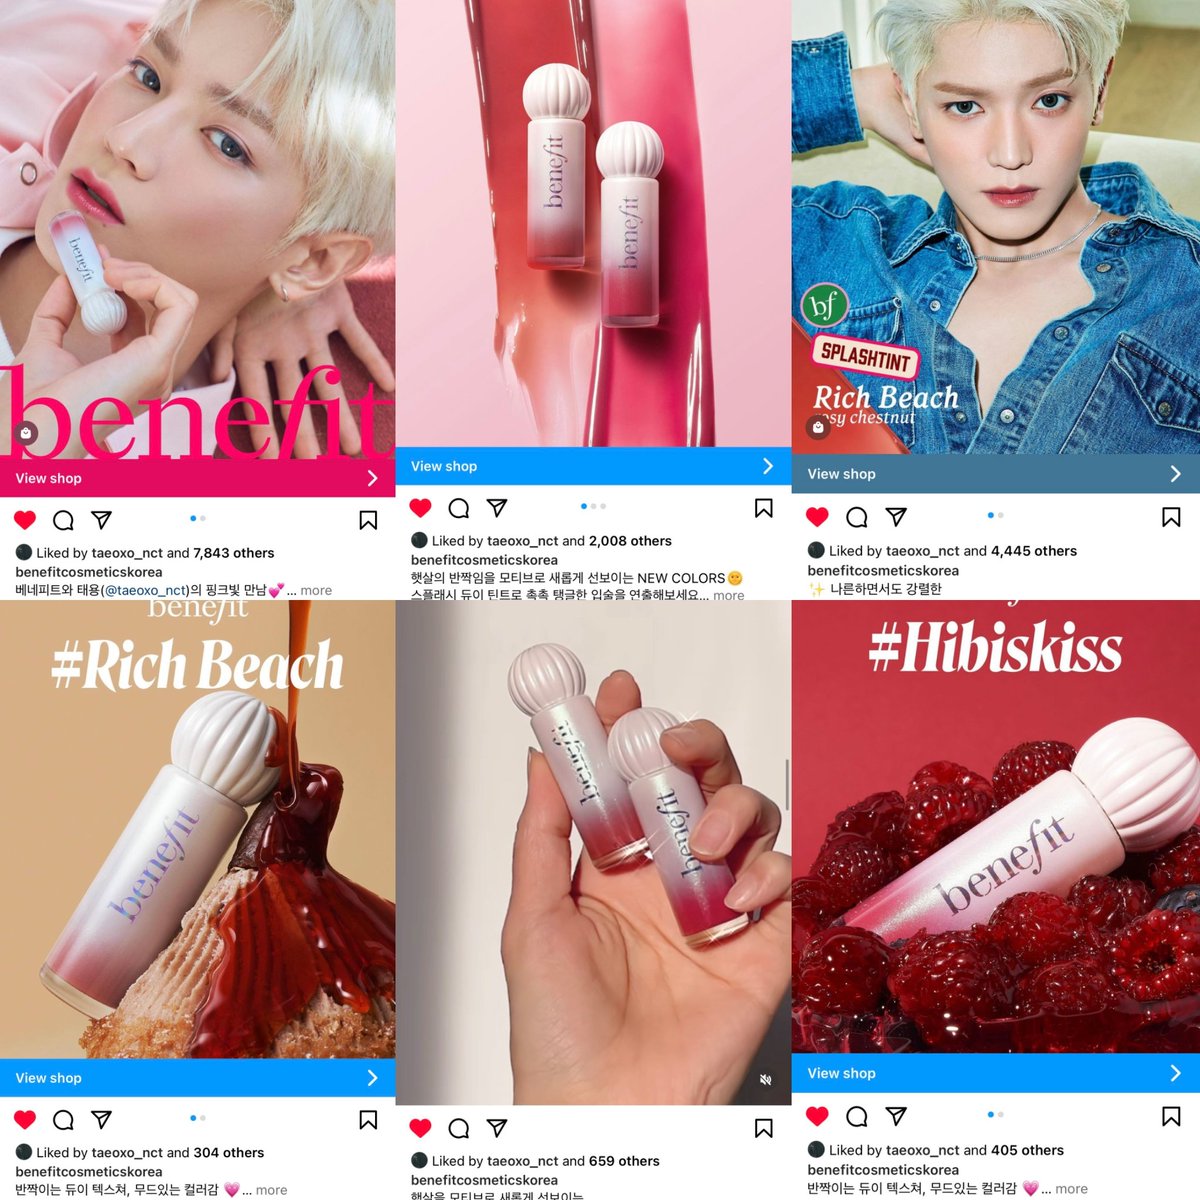 taeyong liked his recent benefit campaign posts on instagram